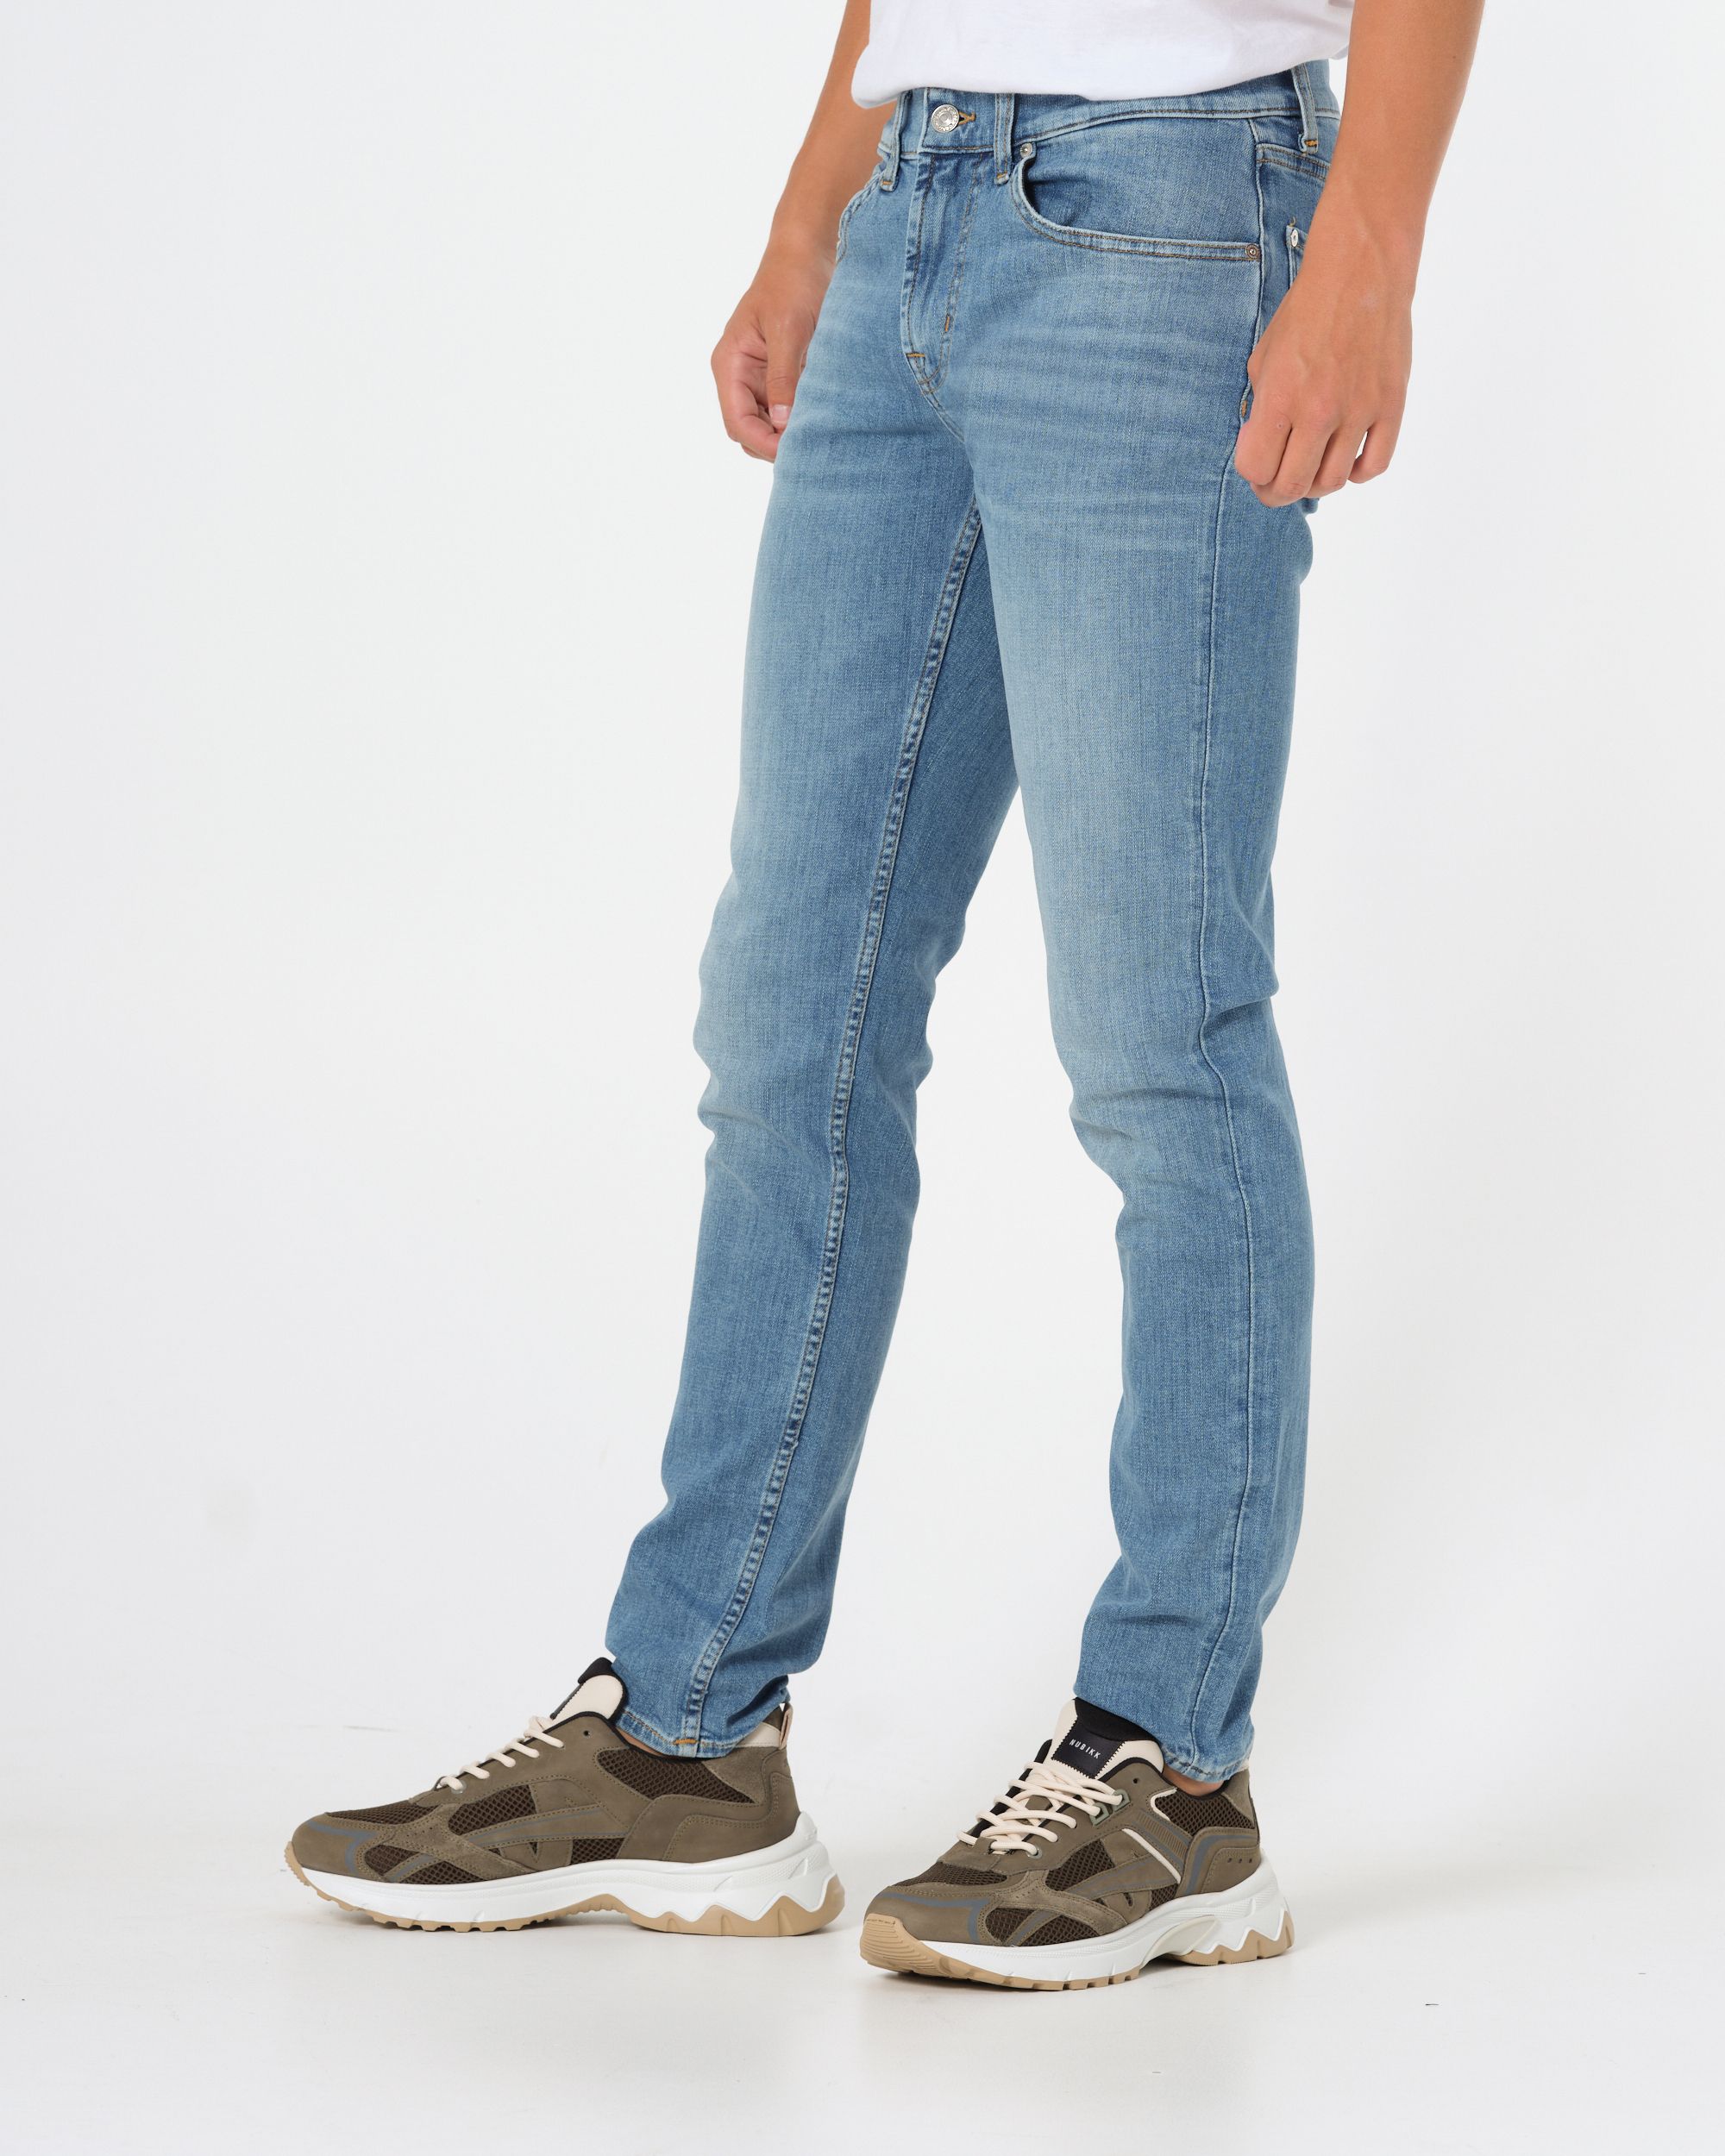 Seven for all mankind Puzzle Jeans Blauw 089205-001-30